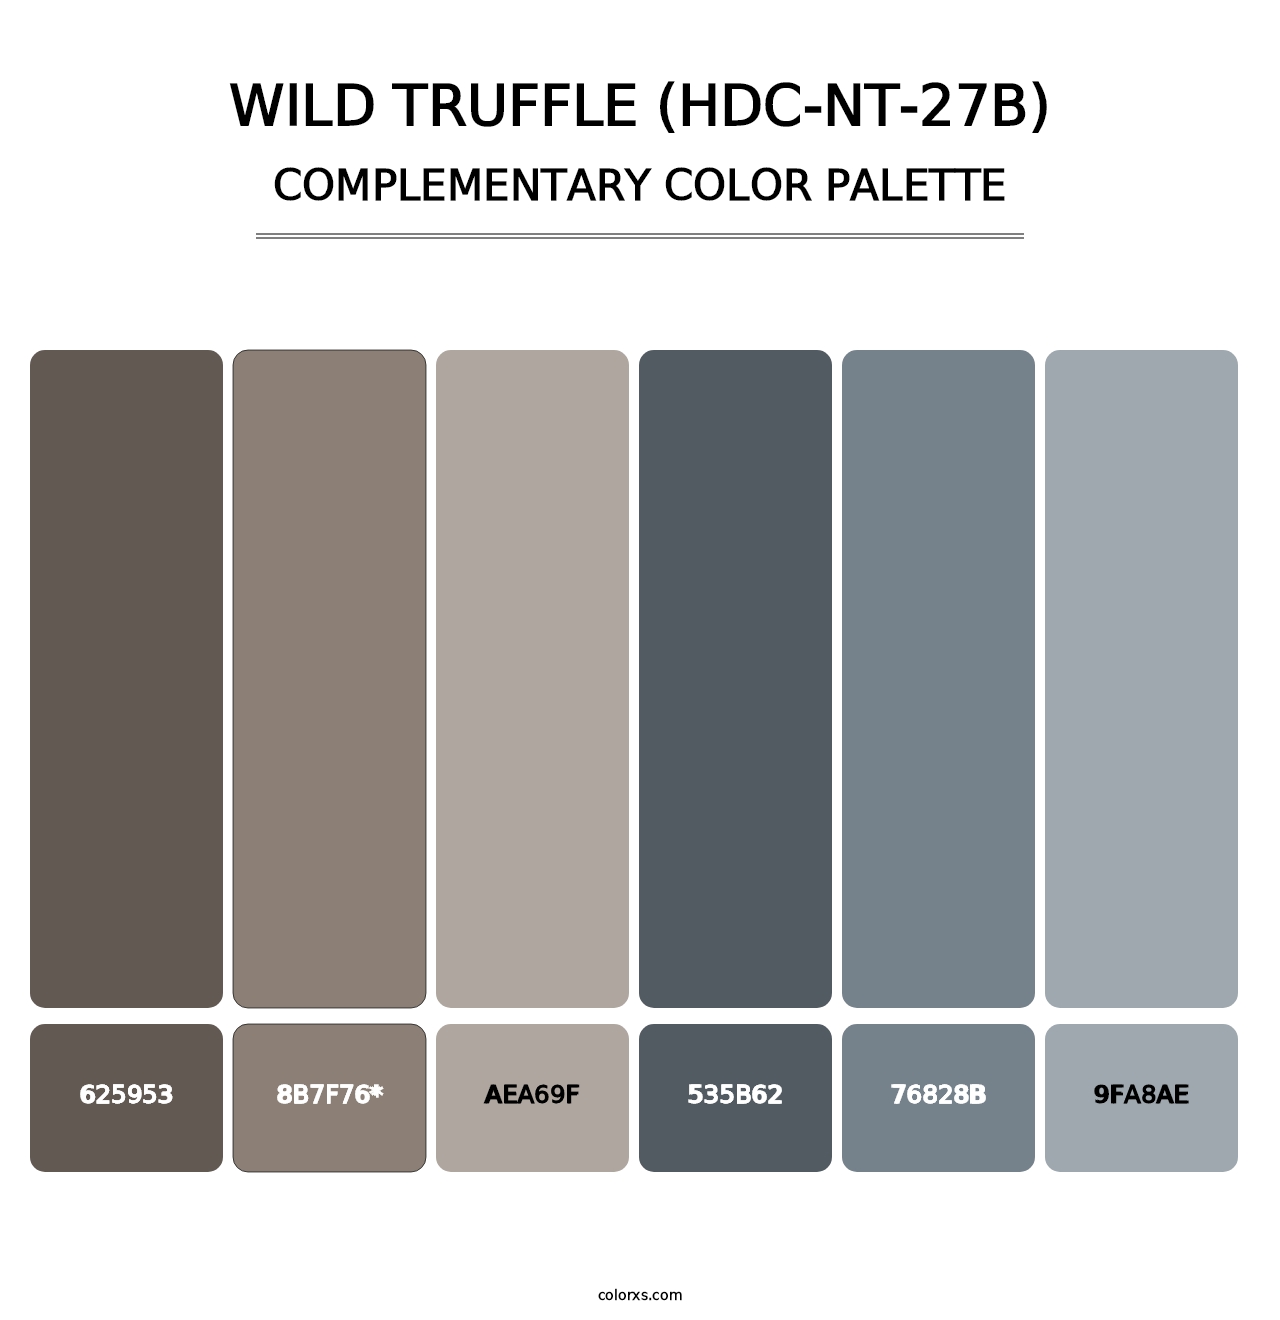 Wild Truffle (HDC-NT-27B) - Complementary Color Palette